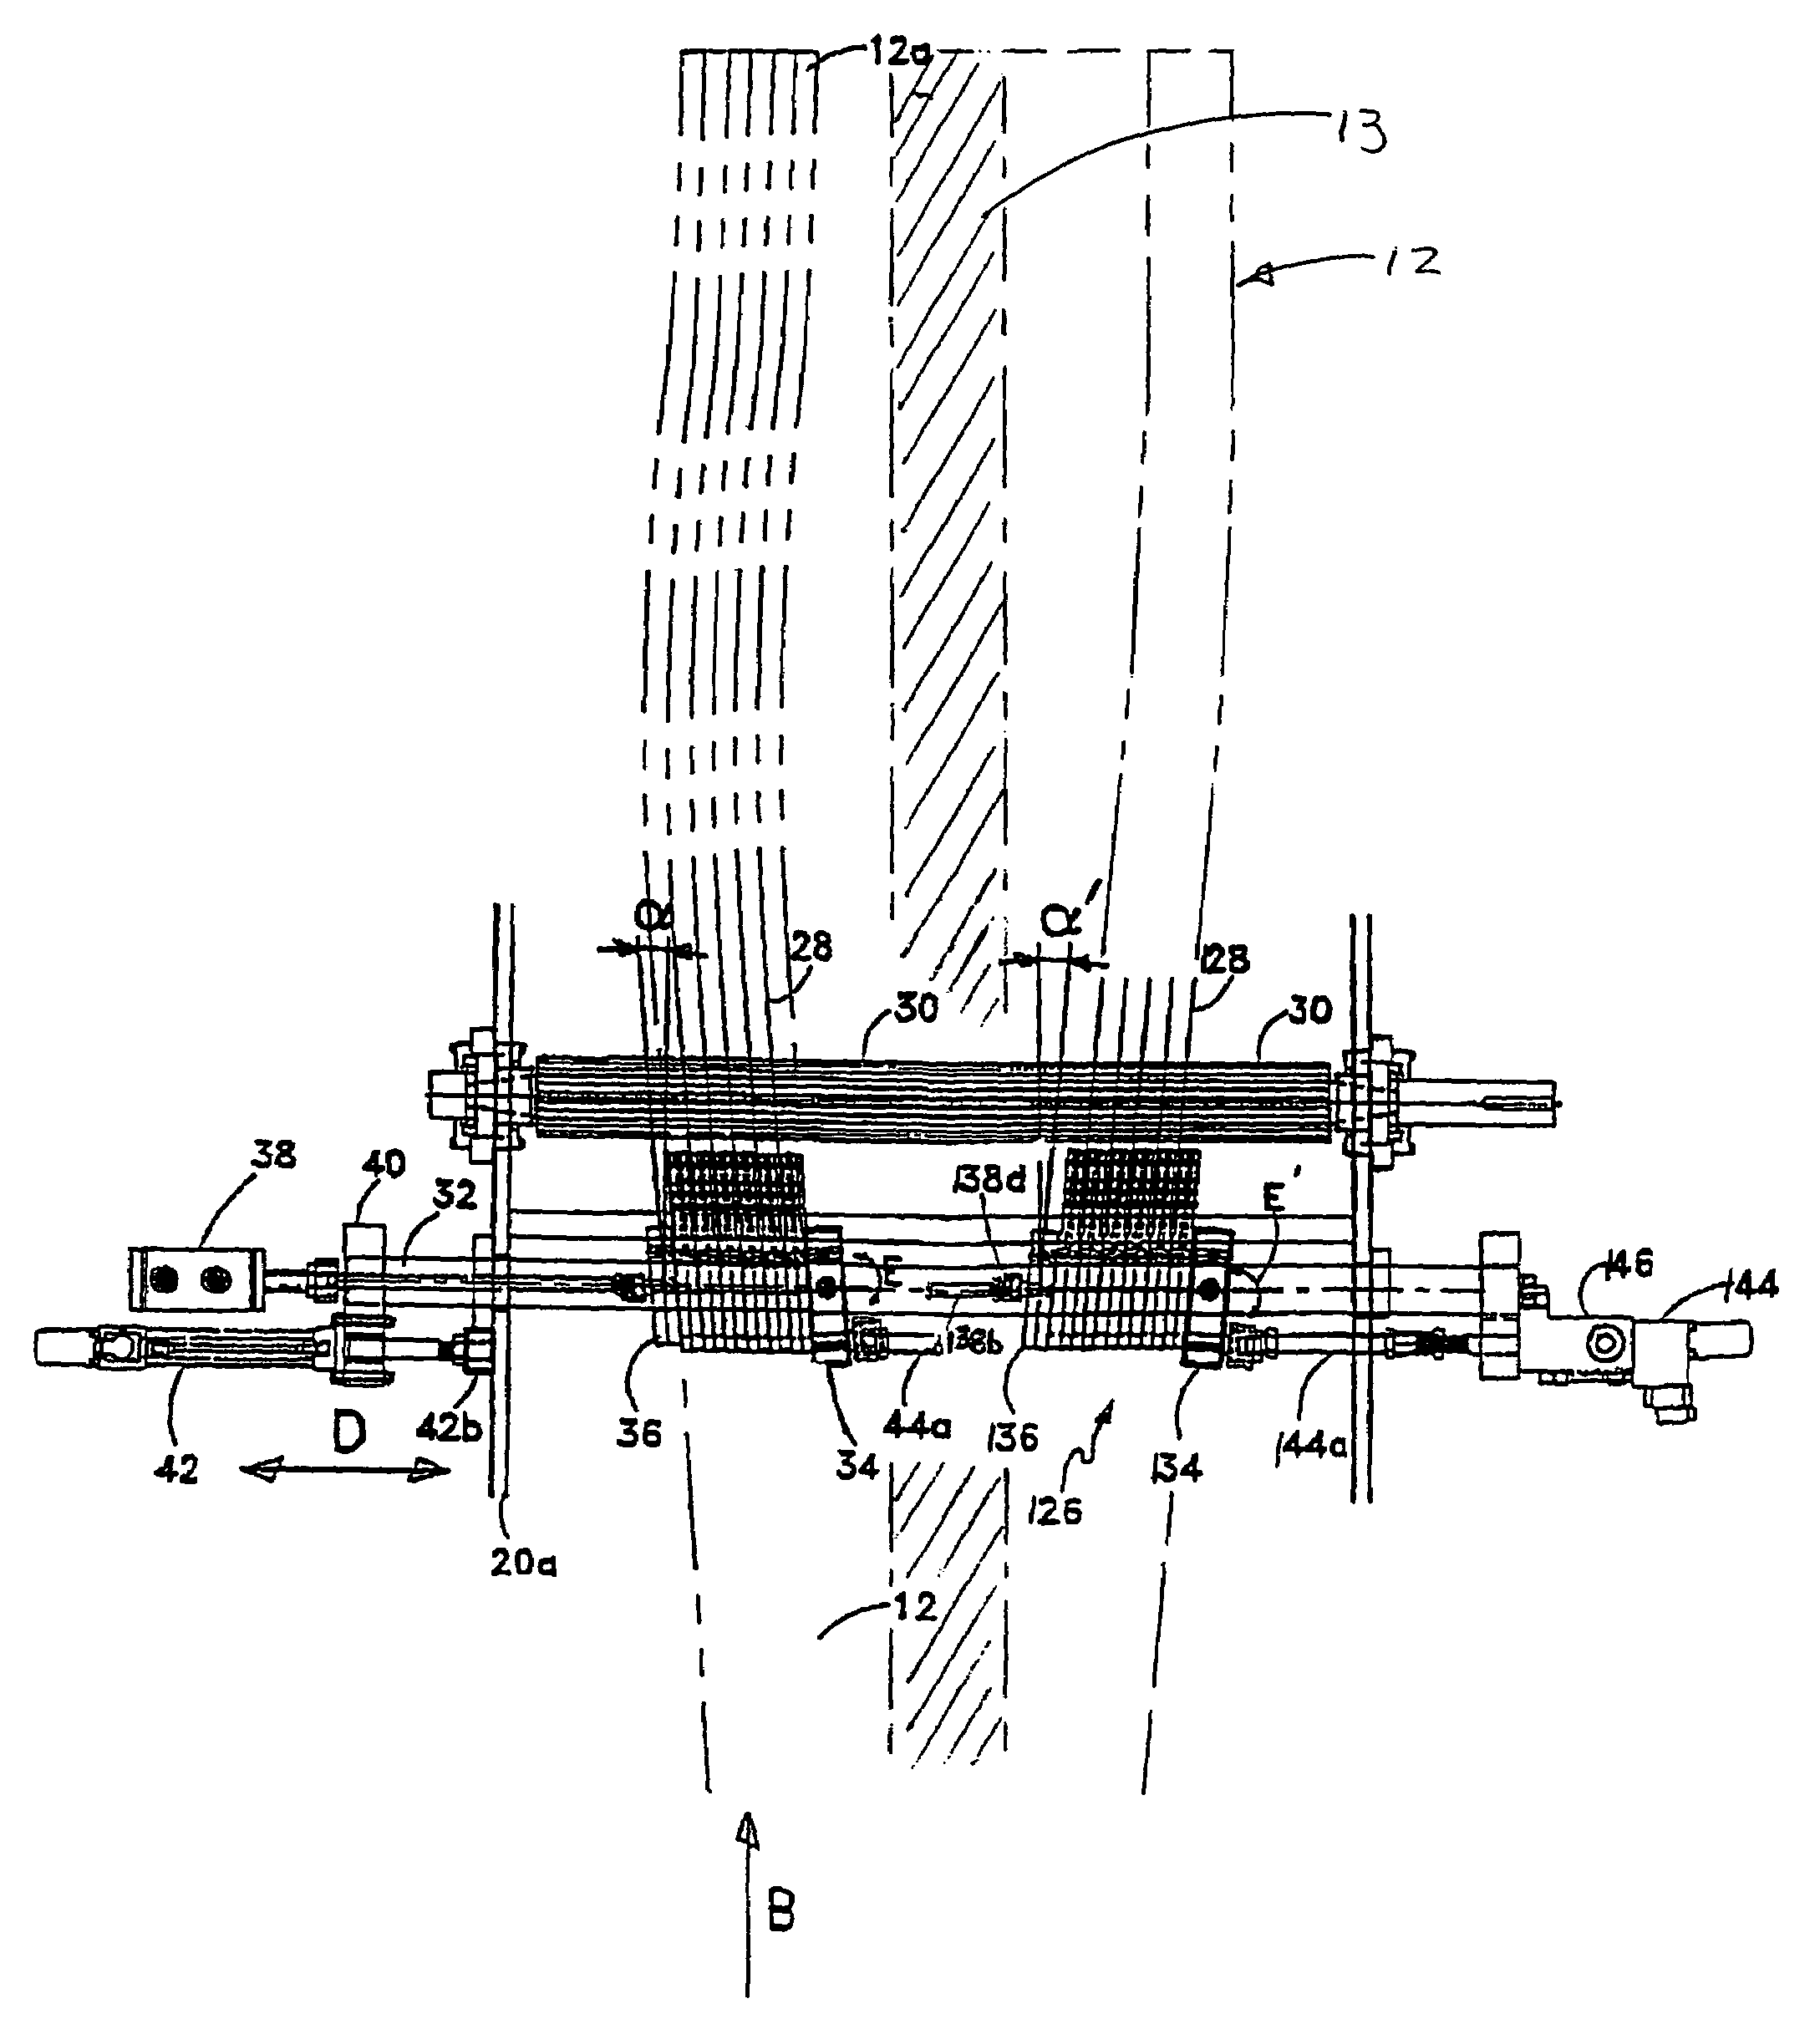 Active sawguide assembly and method